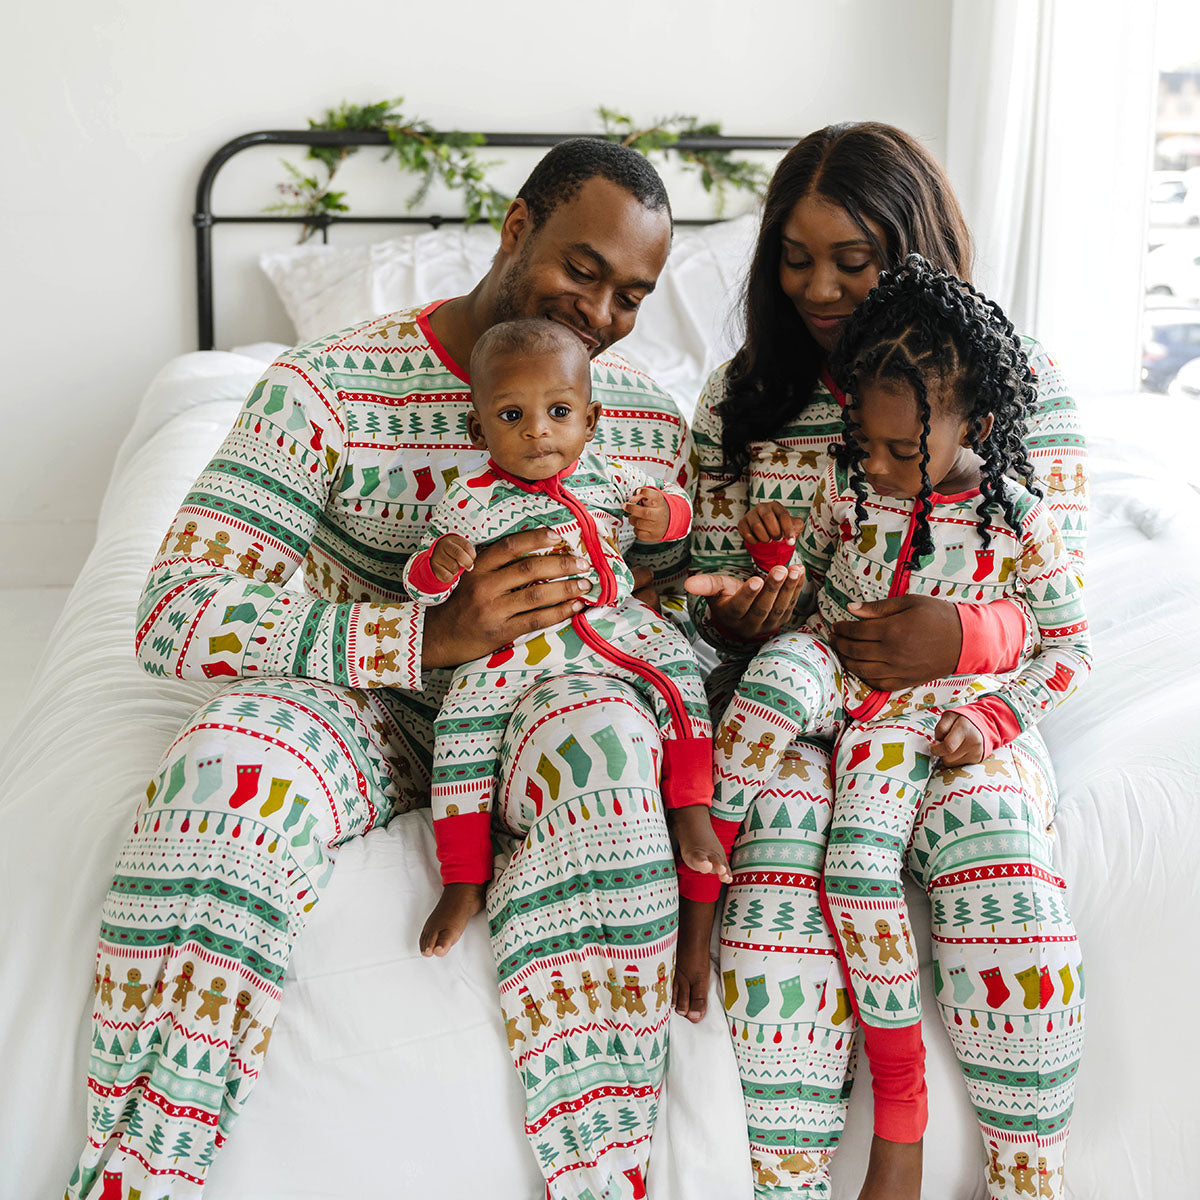 Family of four wearing matching Fair Isle pajamas. Mom is wearing Fair Isle women's pajama pants and top and Dad is matching wearing men's Fair Isle men's top and matching pants. Children are wearing Fair Isle pjs in zippy and two piece styles